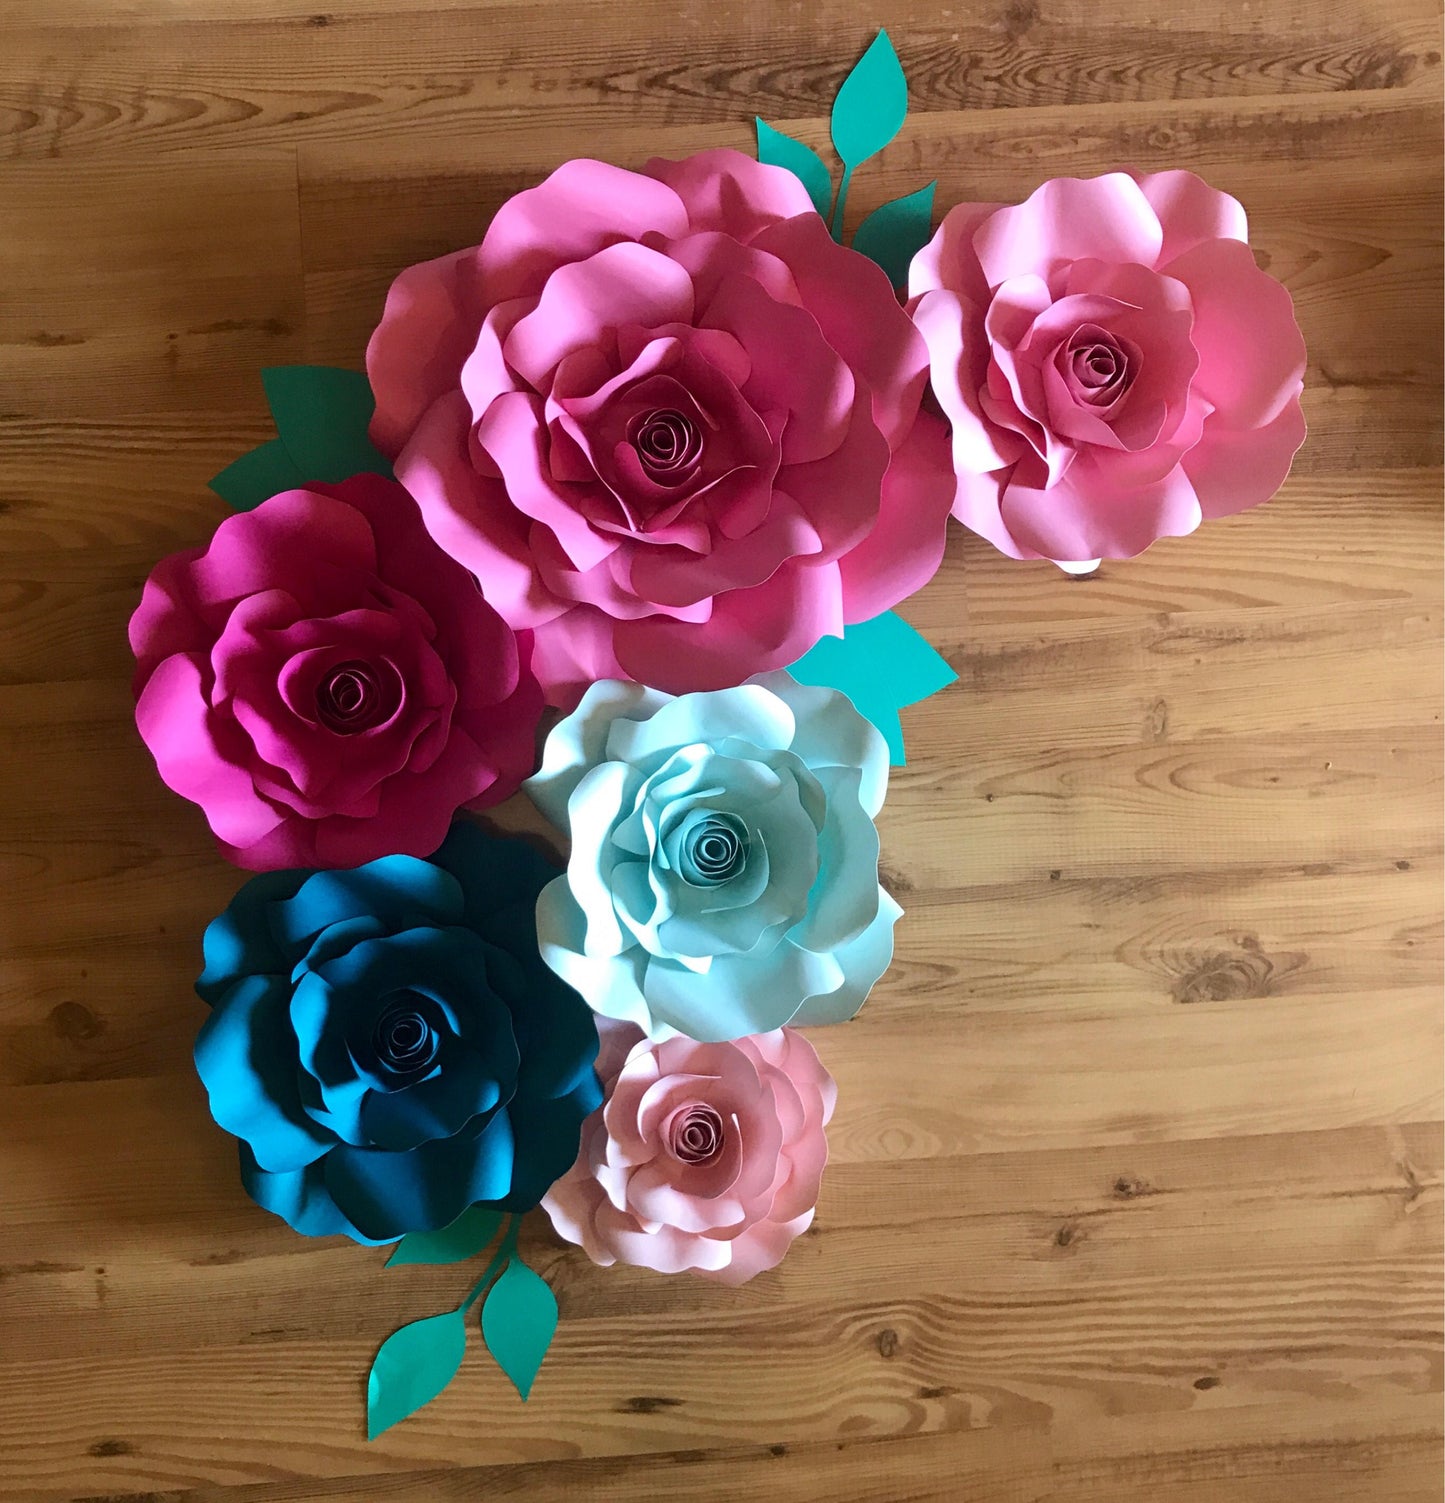 Large paper flowers for baby girl nursery or baby shower